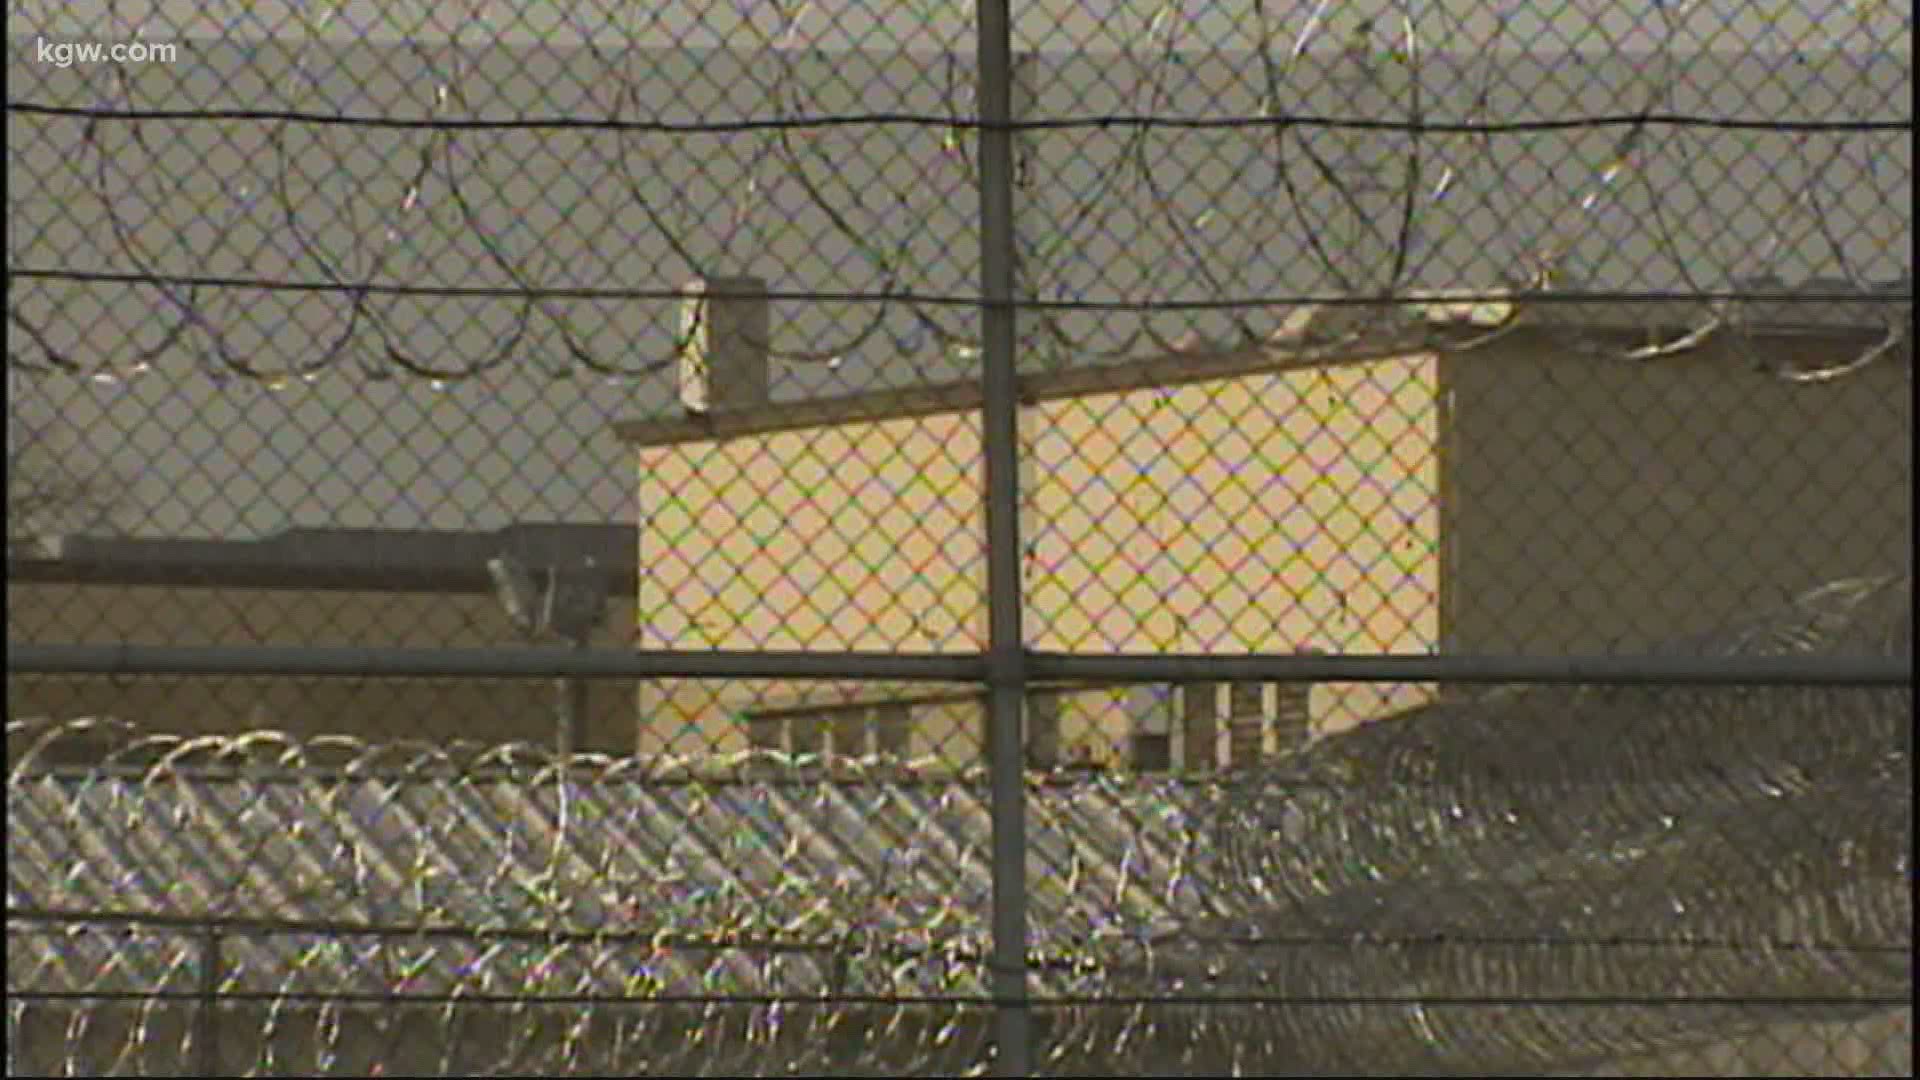 More than 3,200 inmates have contracted the coronavirus.